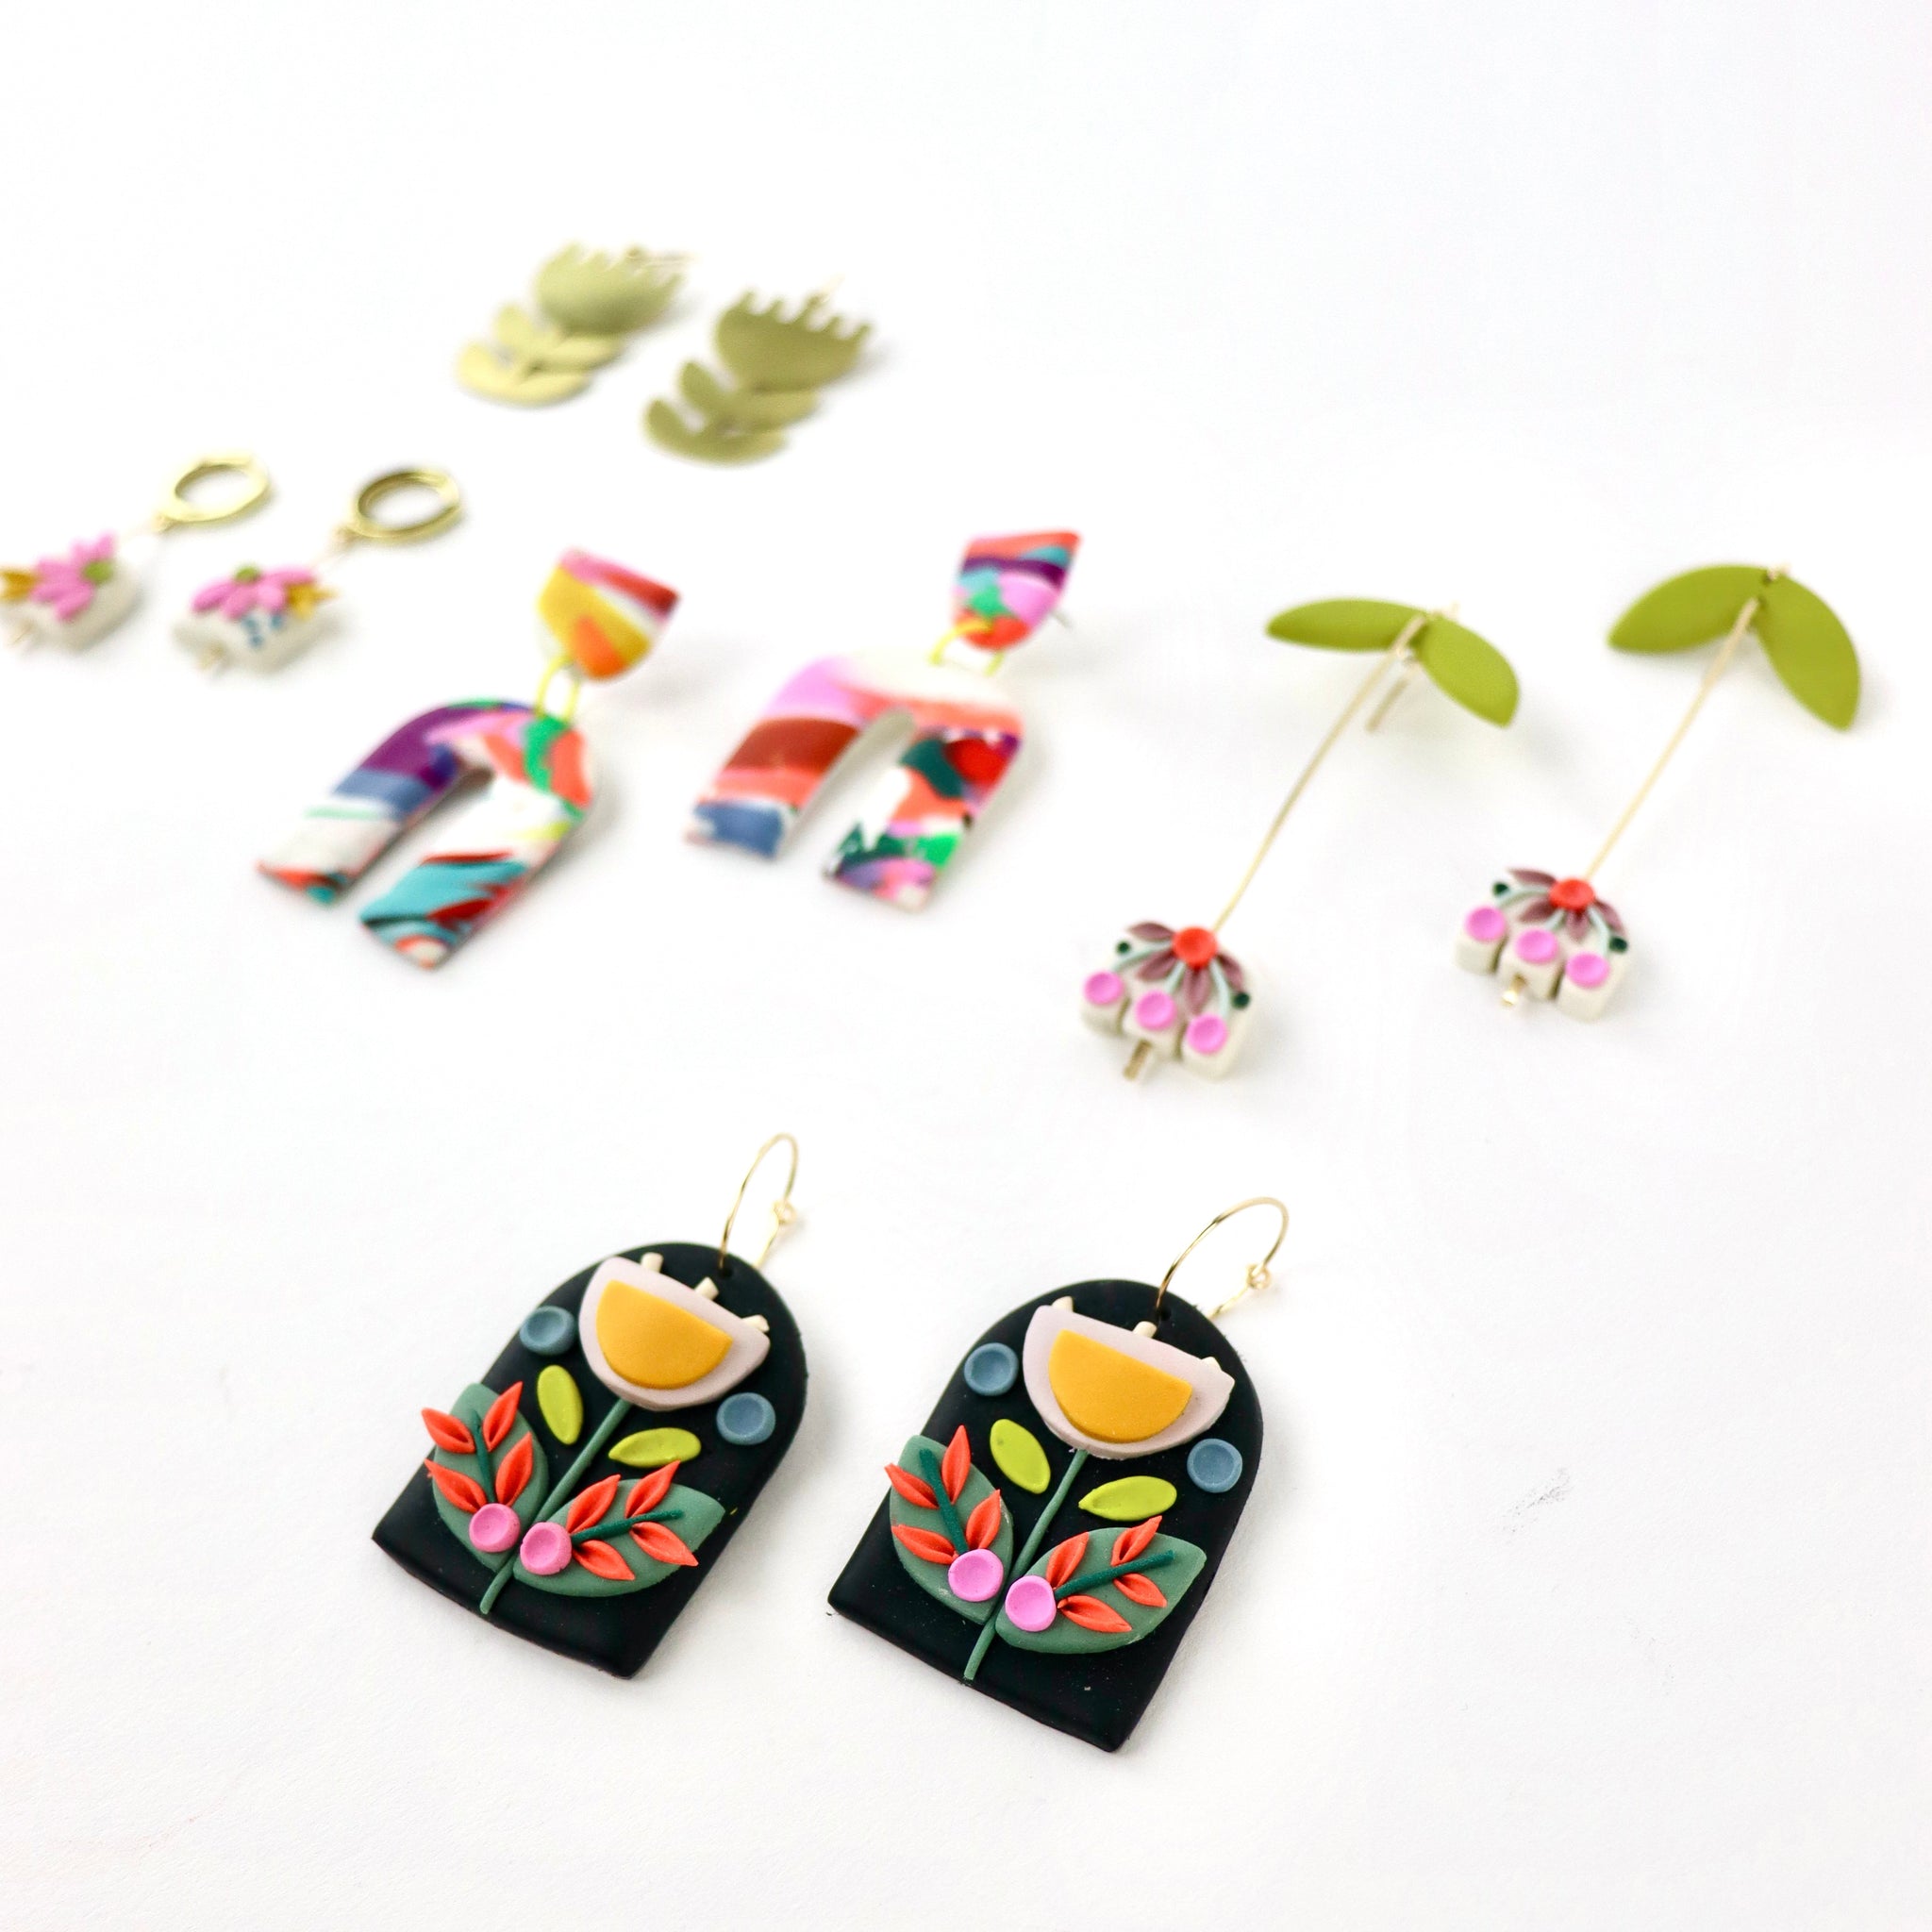 Polymer Clay Earrings by Meeshmade